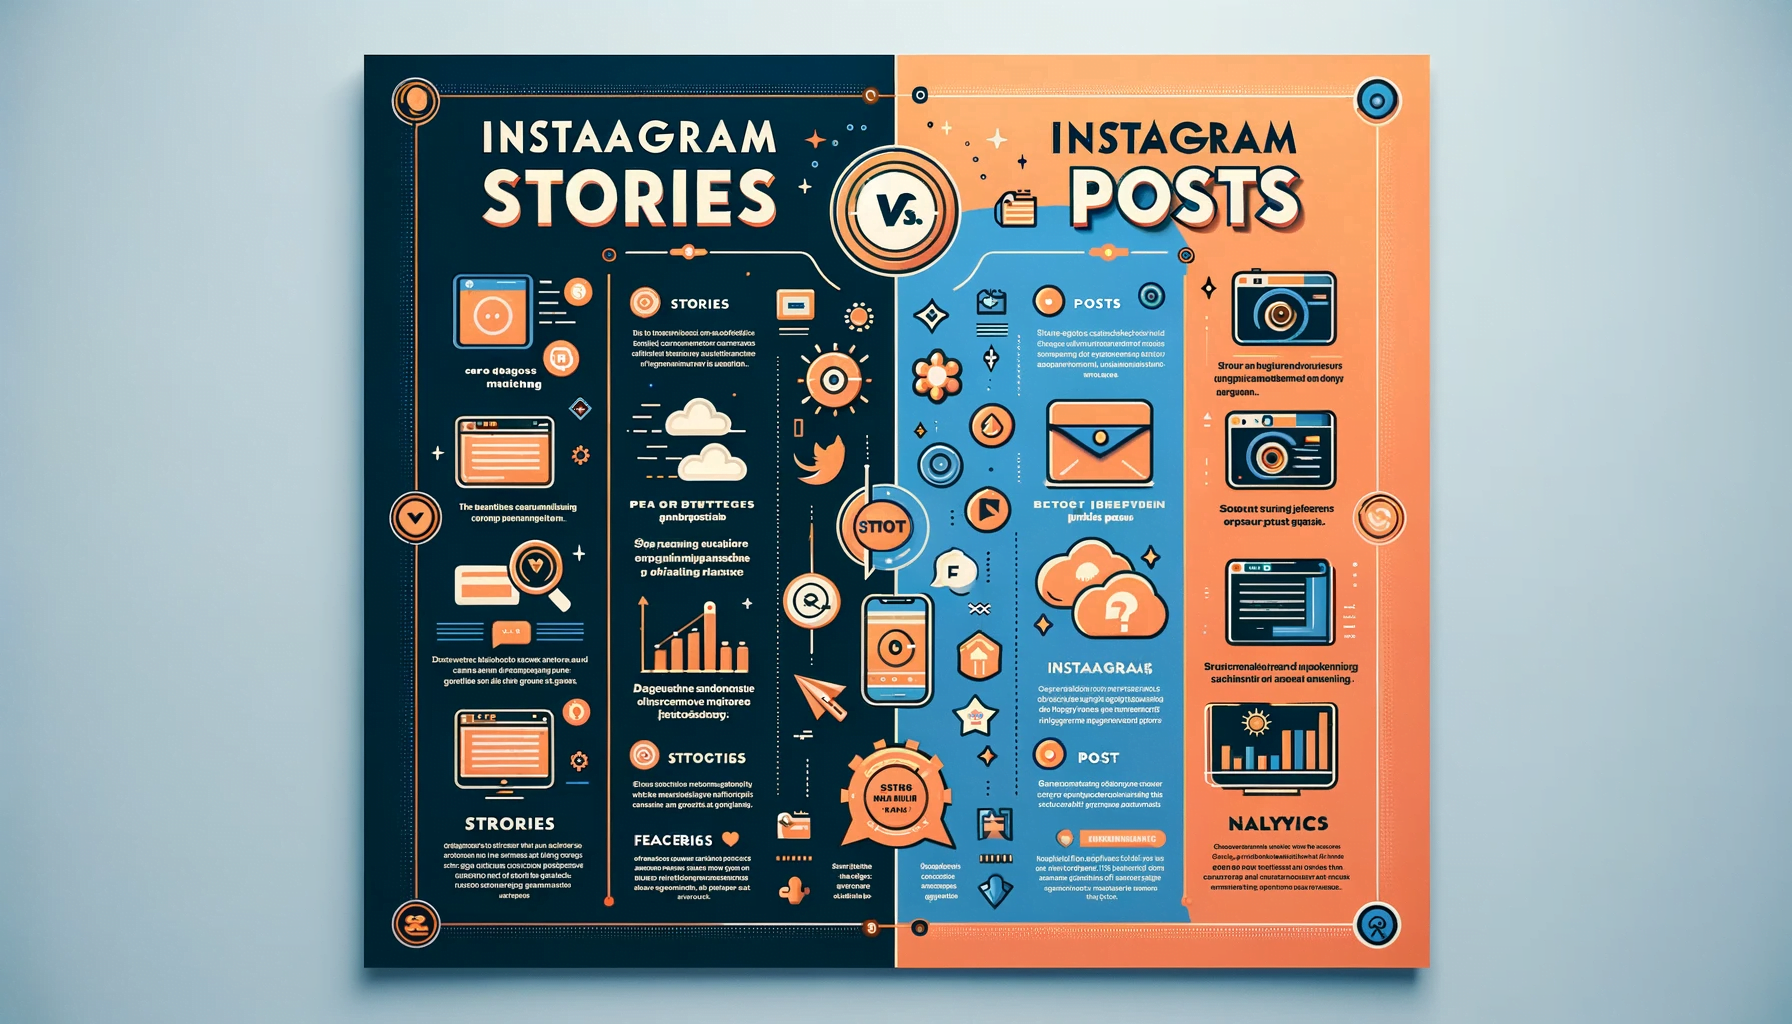 Instagram Stories vs. Posts : Infographic detailing key differences between Instagram Stories and Posts, including features and engagement strategies.